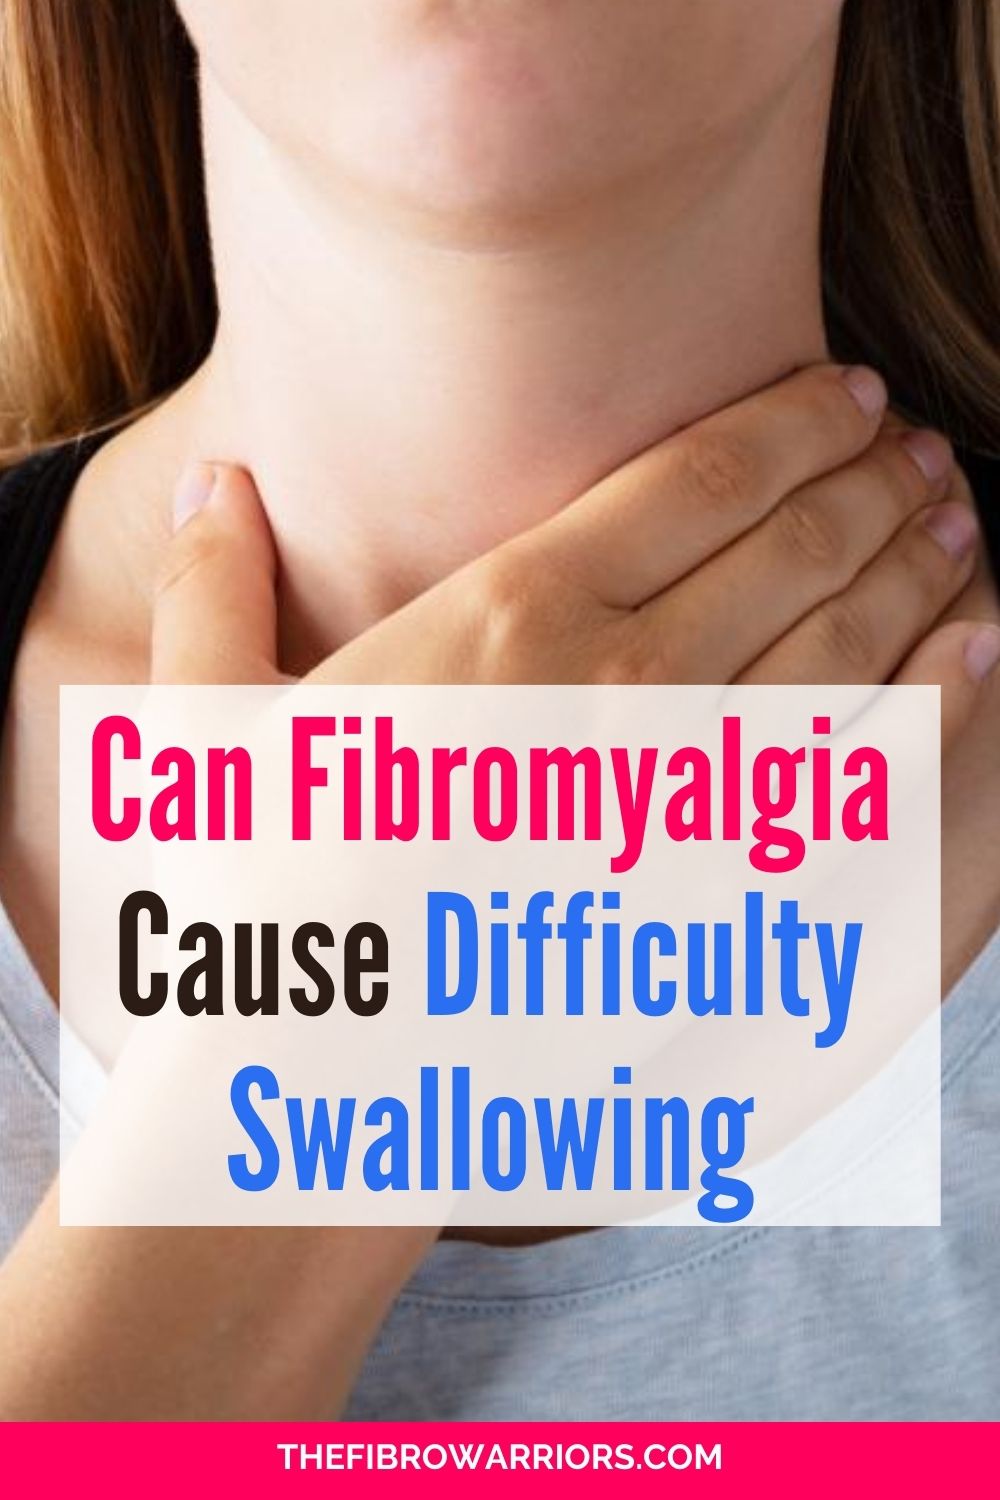 Can Fibromyalgia Cause Difficulty Swallowing